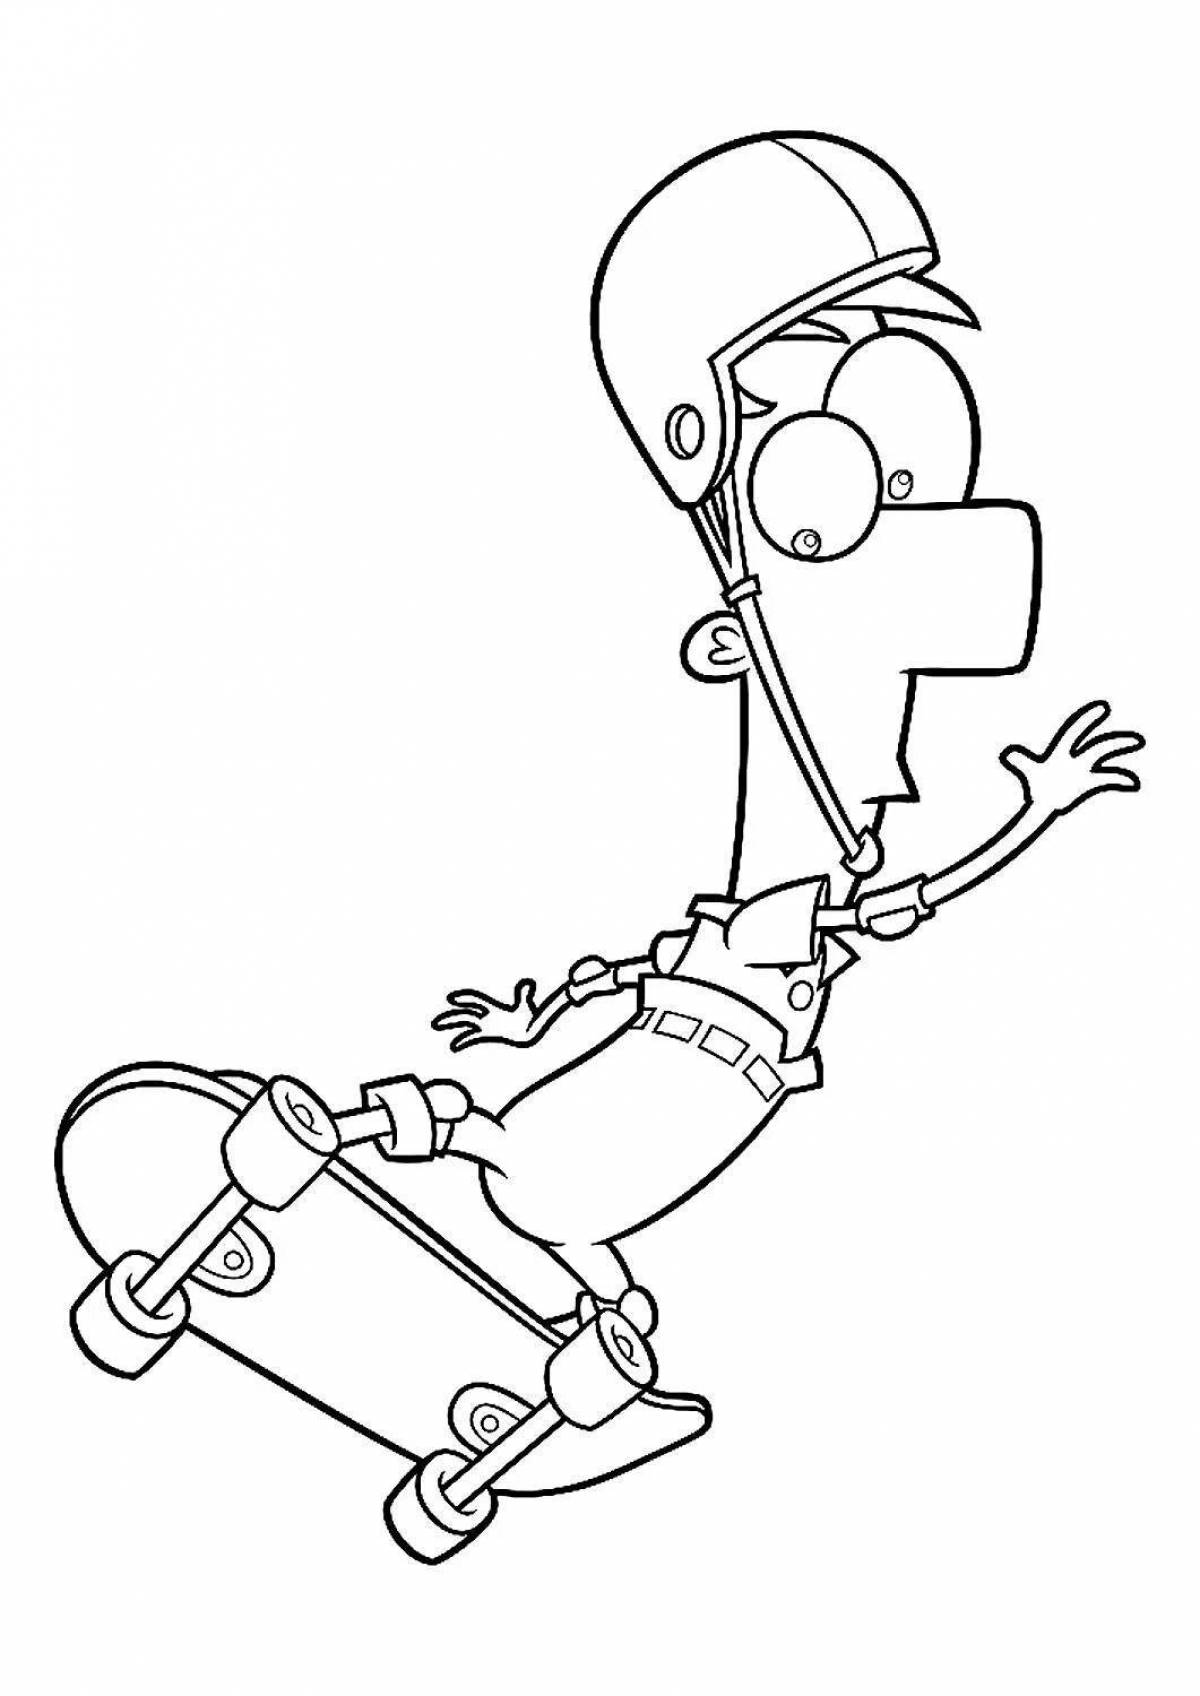 Acrobatic skateboarder coloring page